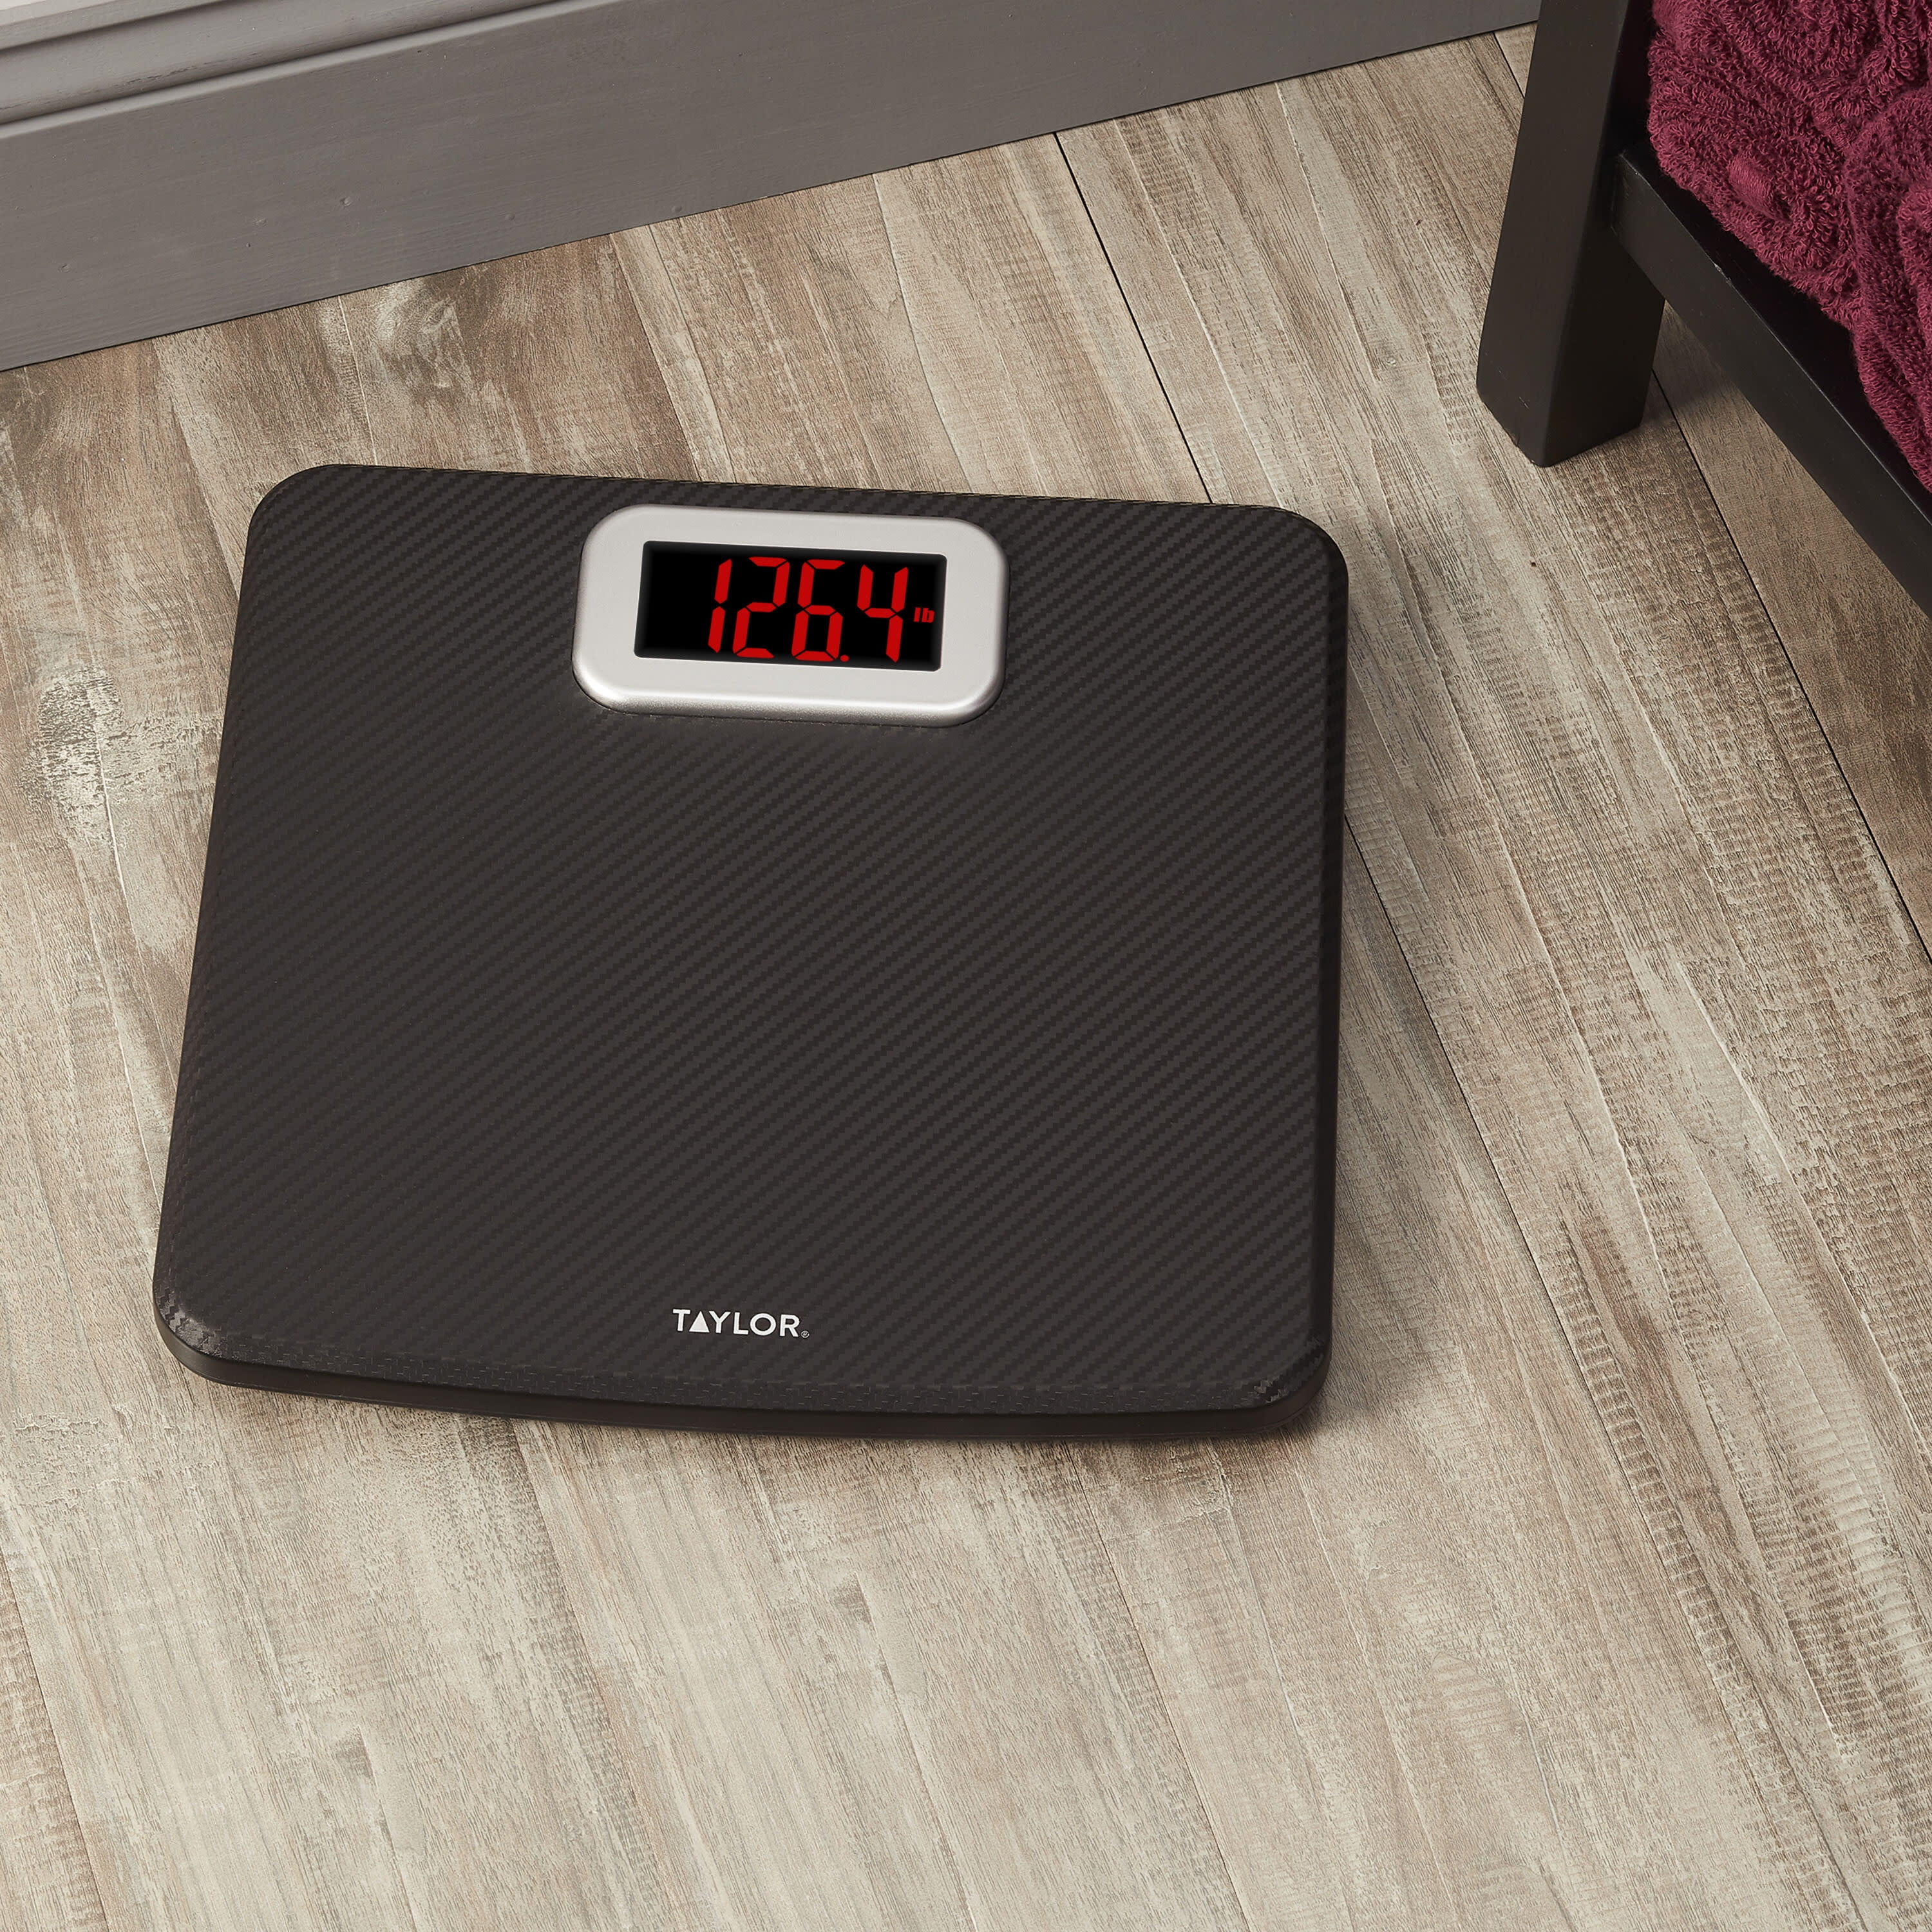 Taylor Precision Products Taylor Digital Bathroom Scale with Carbon Fiber Finish 